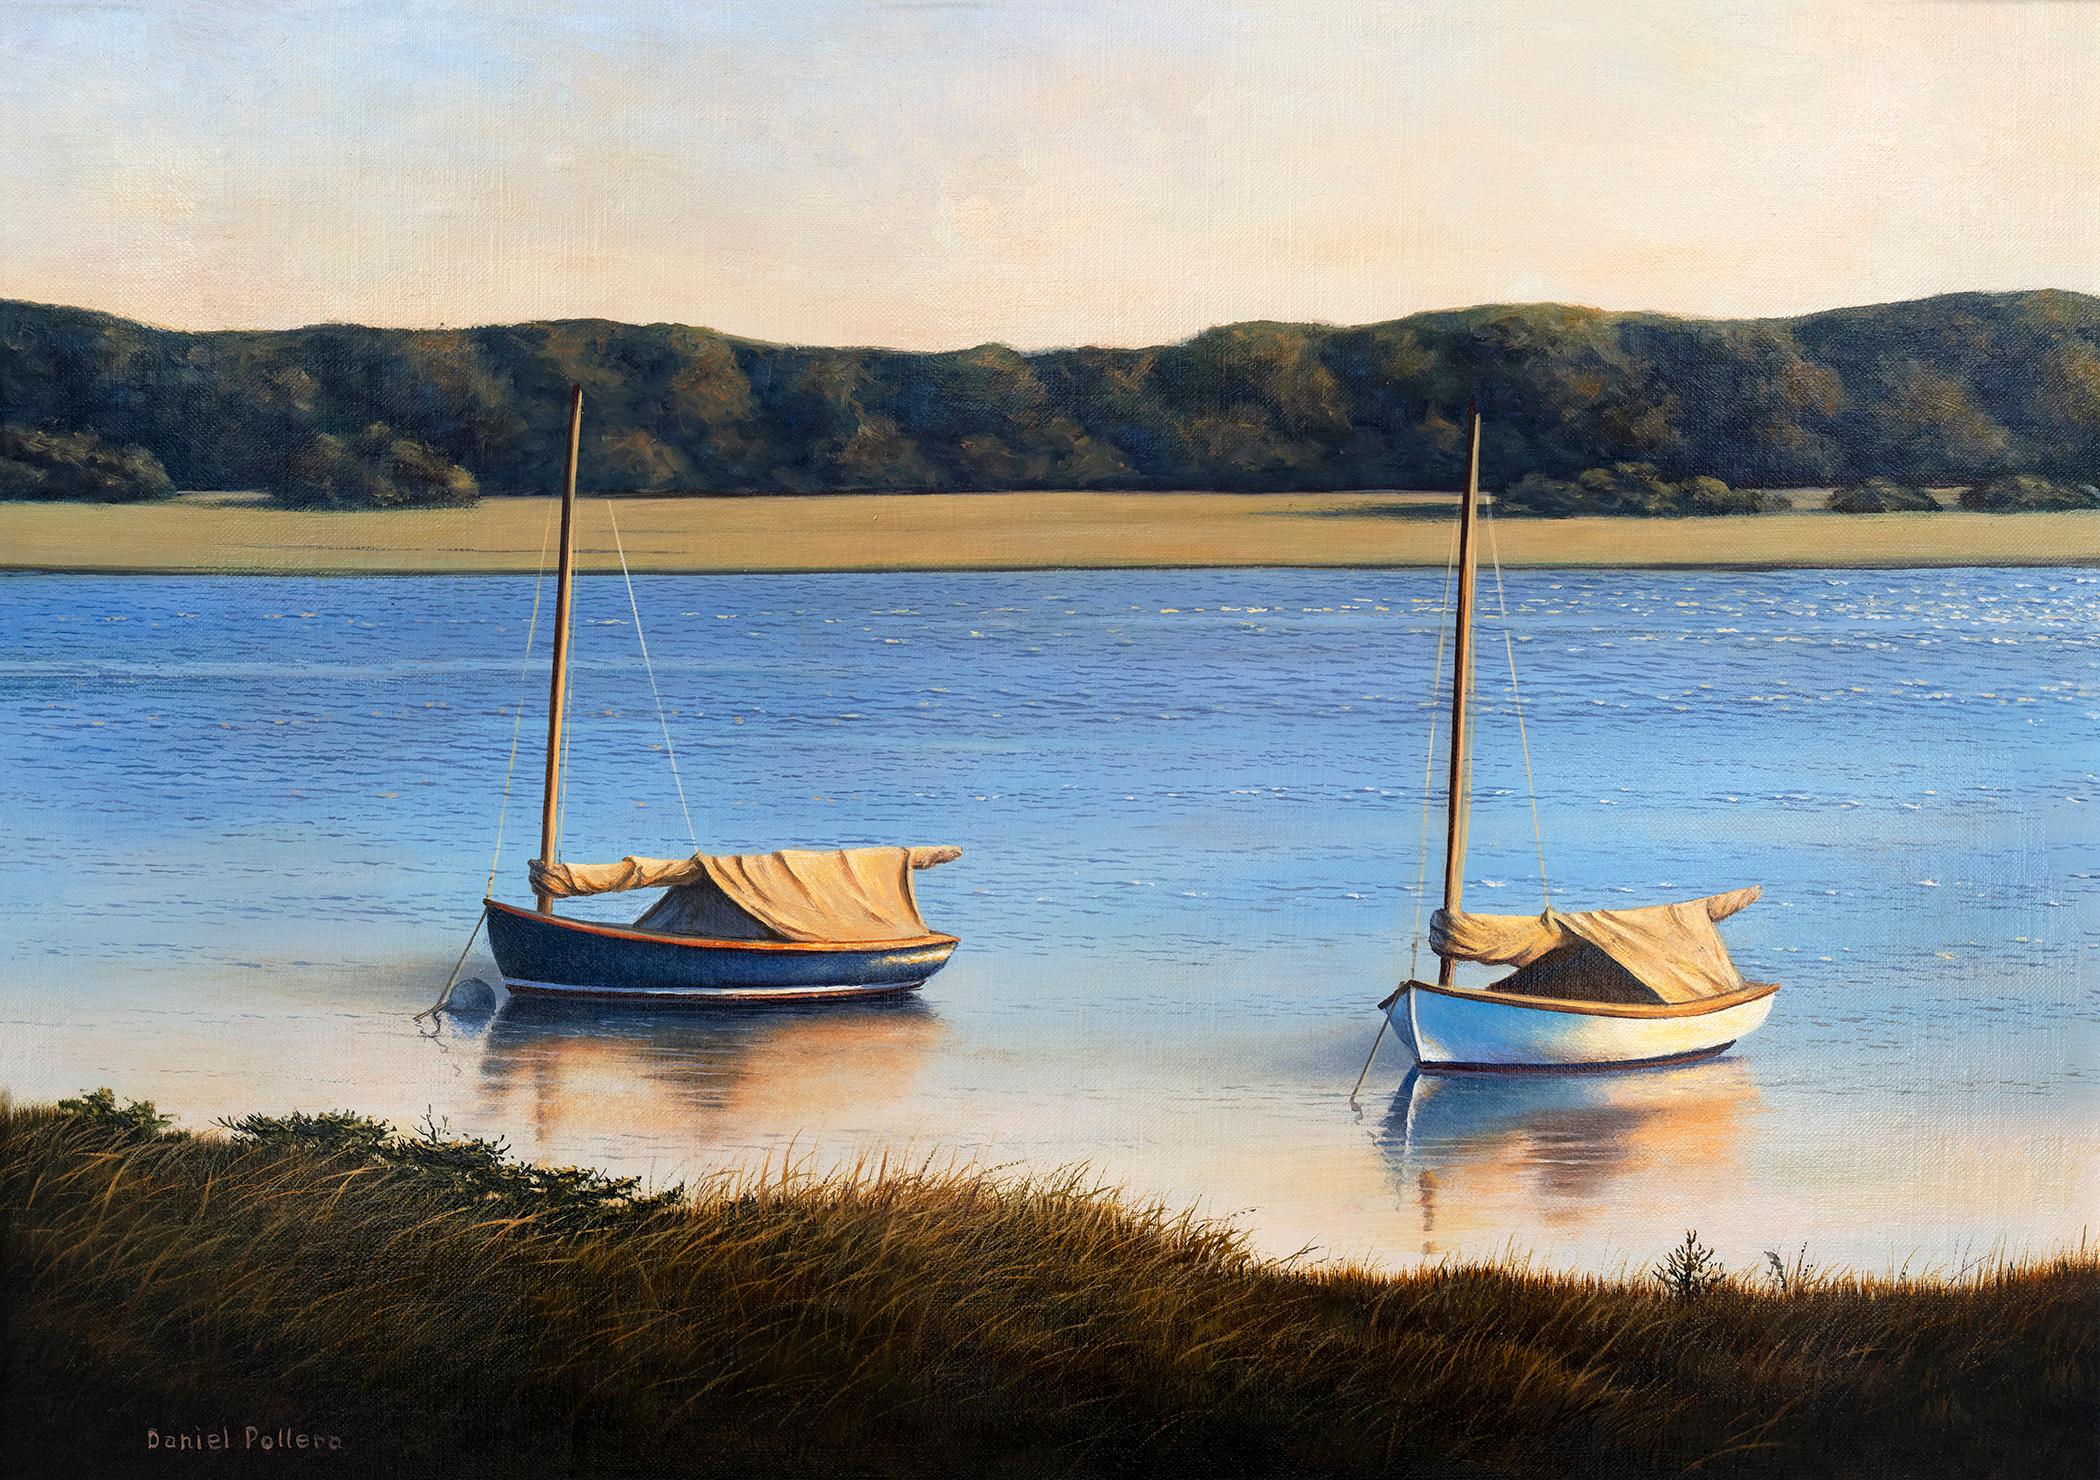 This coastal seascape Limited Edition giclee print by Daniel Pollera captures two small sailboats, one white and one navy blue, anchored along a grassy shoreline in the foreground. The boats' reflections are visible in the pale water, which fades